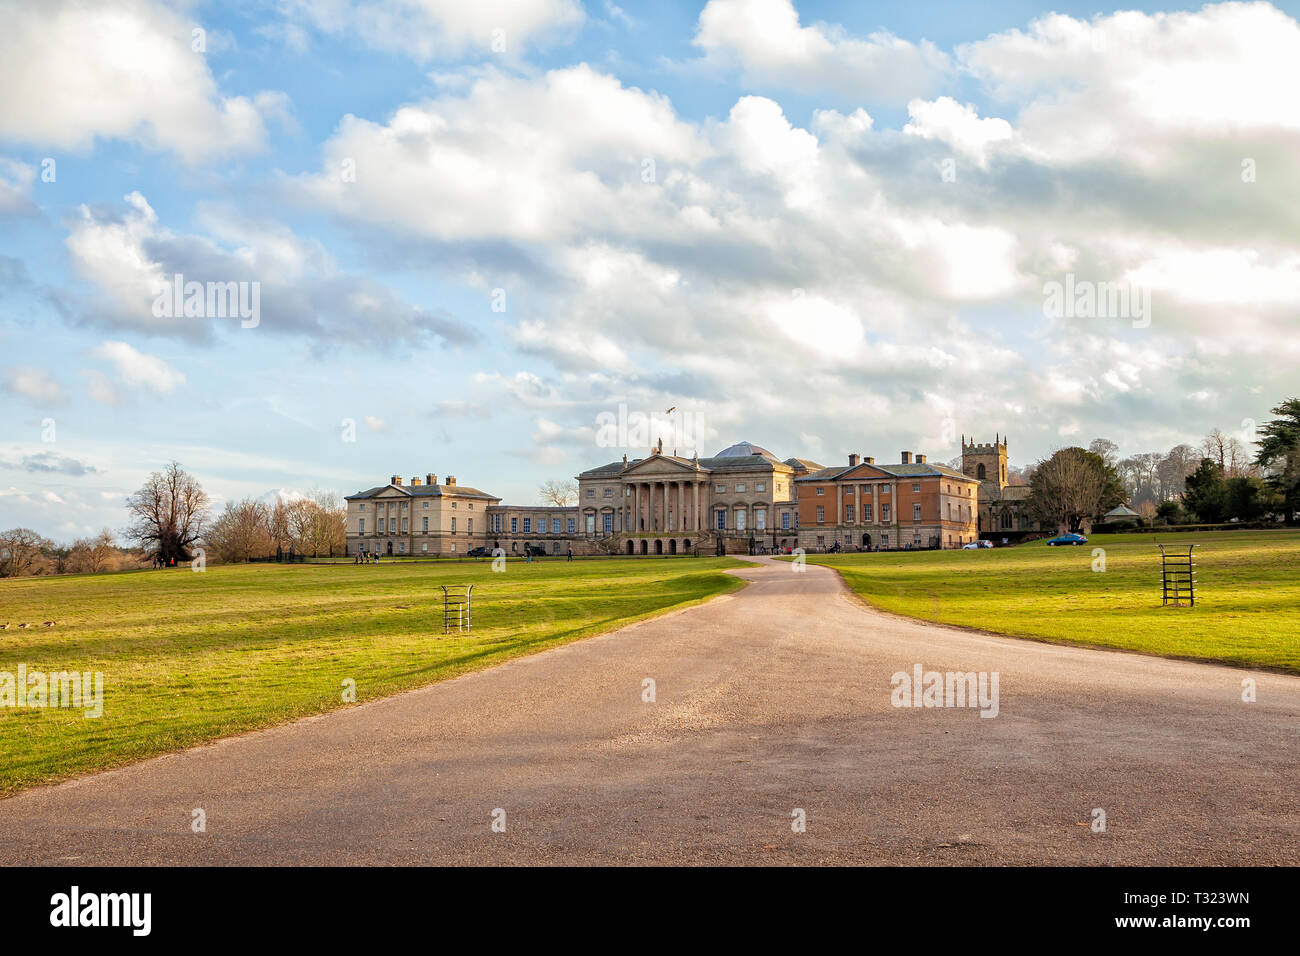 Landscape image of  Kedleston Hall,an English country house in Kedleston, Derbyshire with a sweeping driveway. Stock Photo